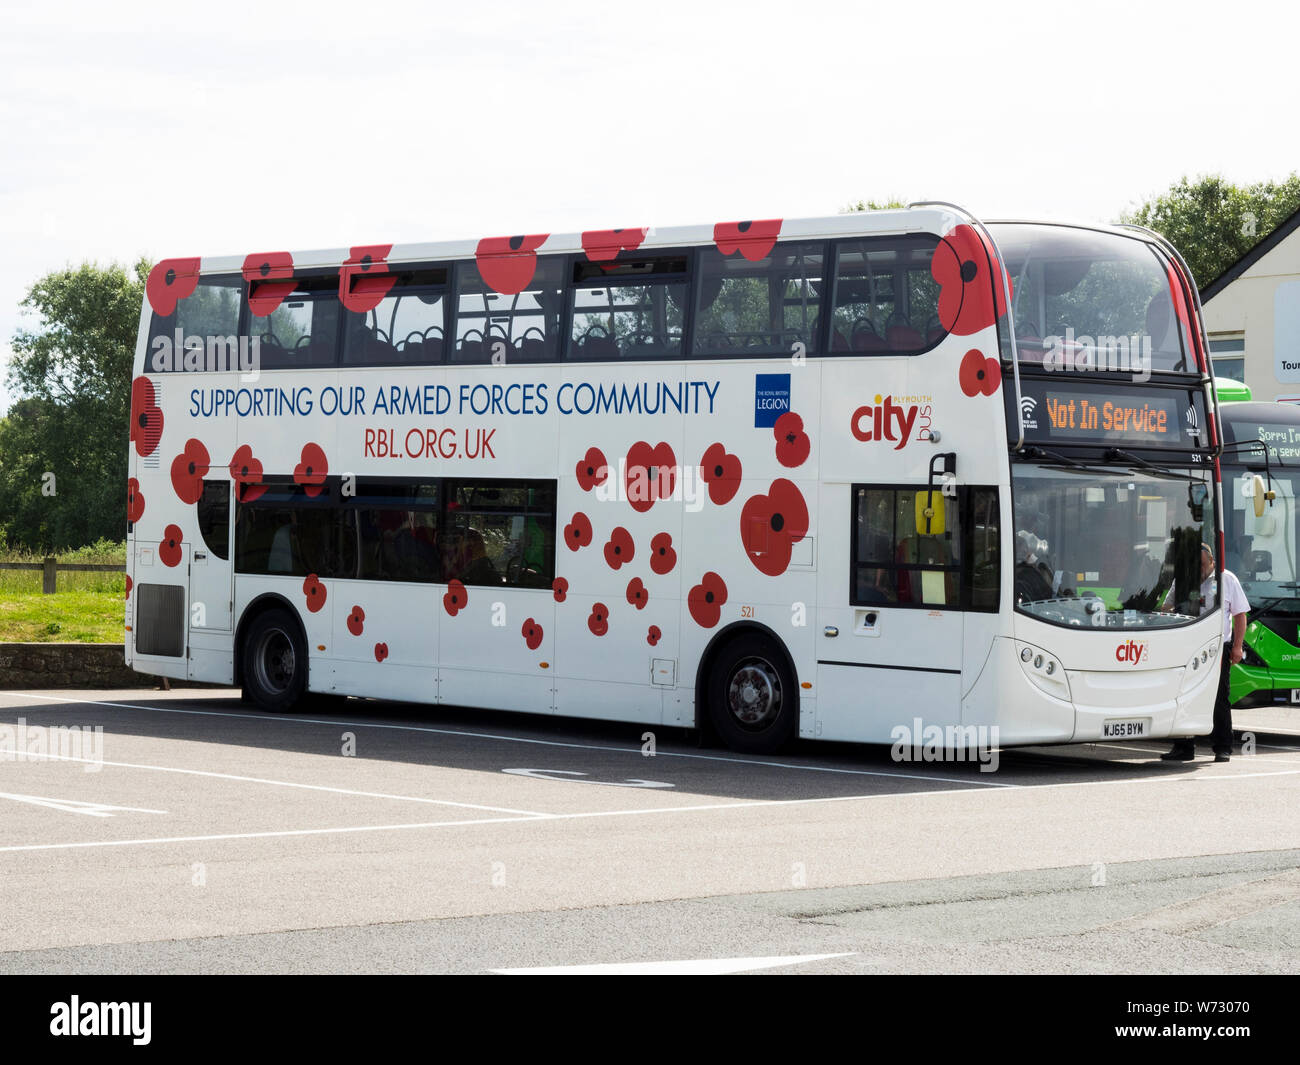 Coach covered in poppies, Royal British Legion advertising, UK Stock Photo